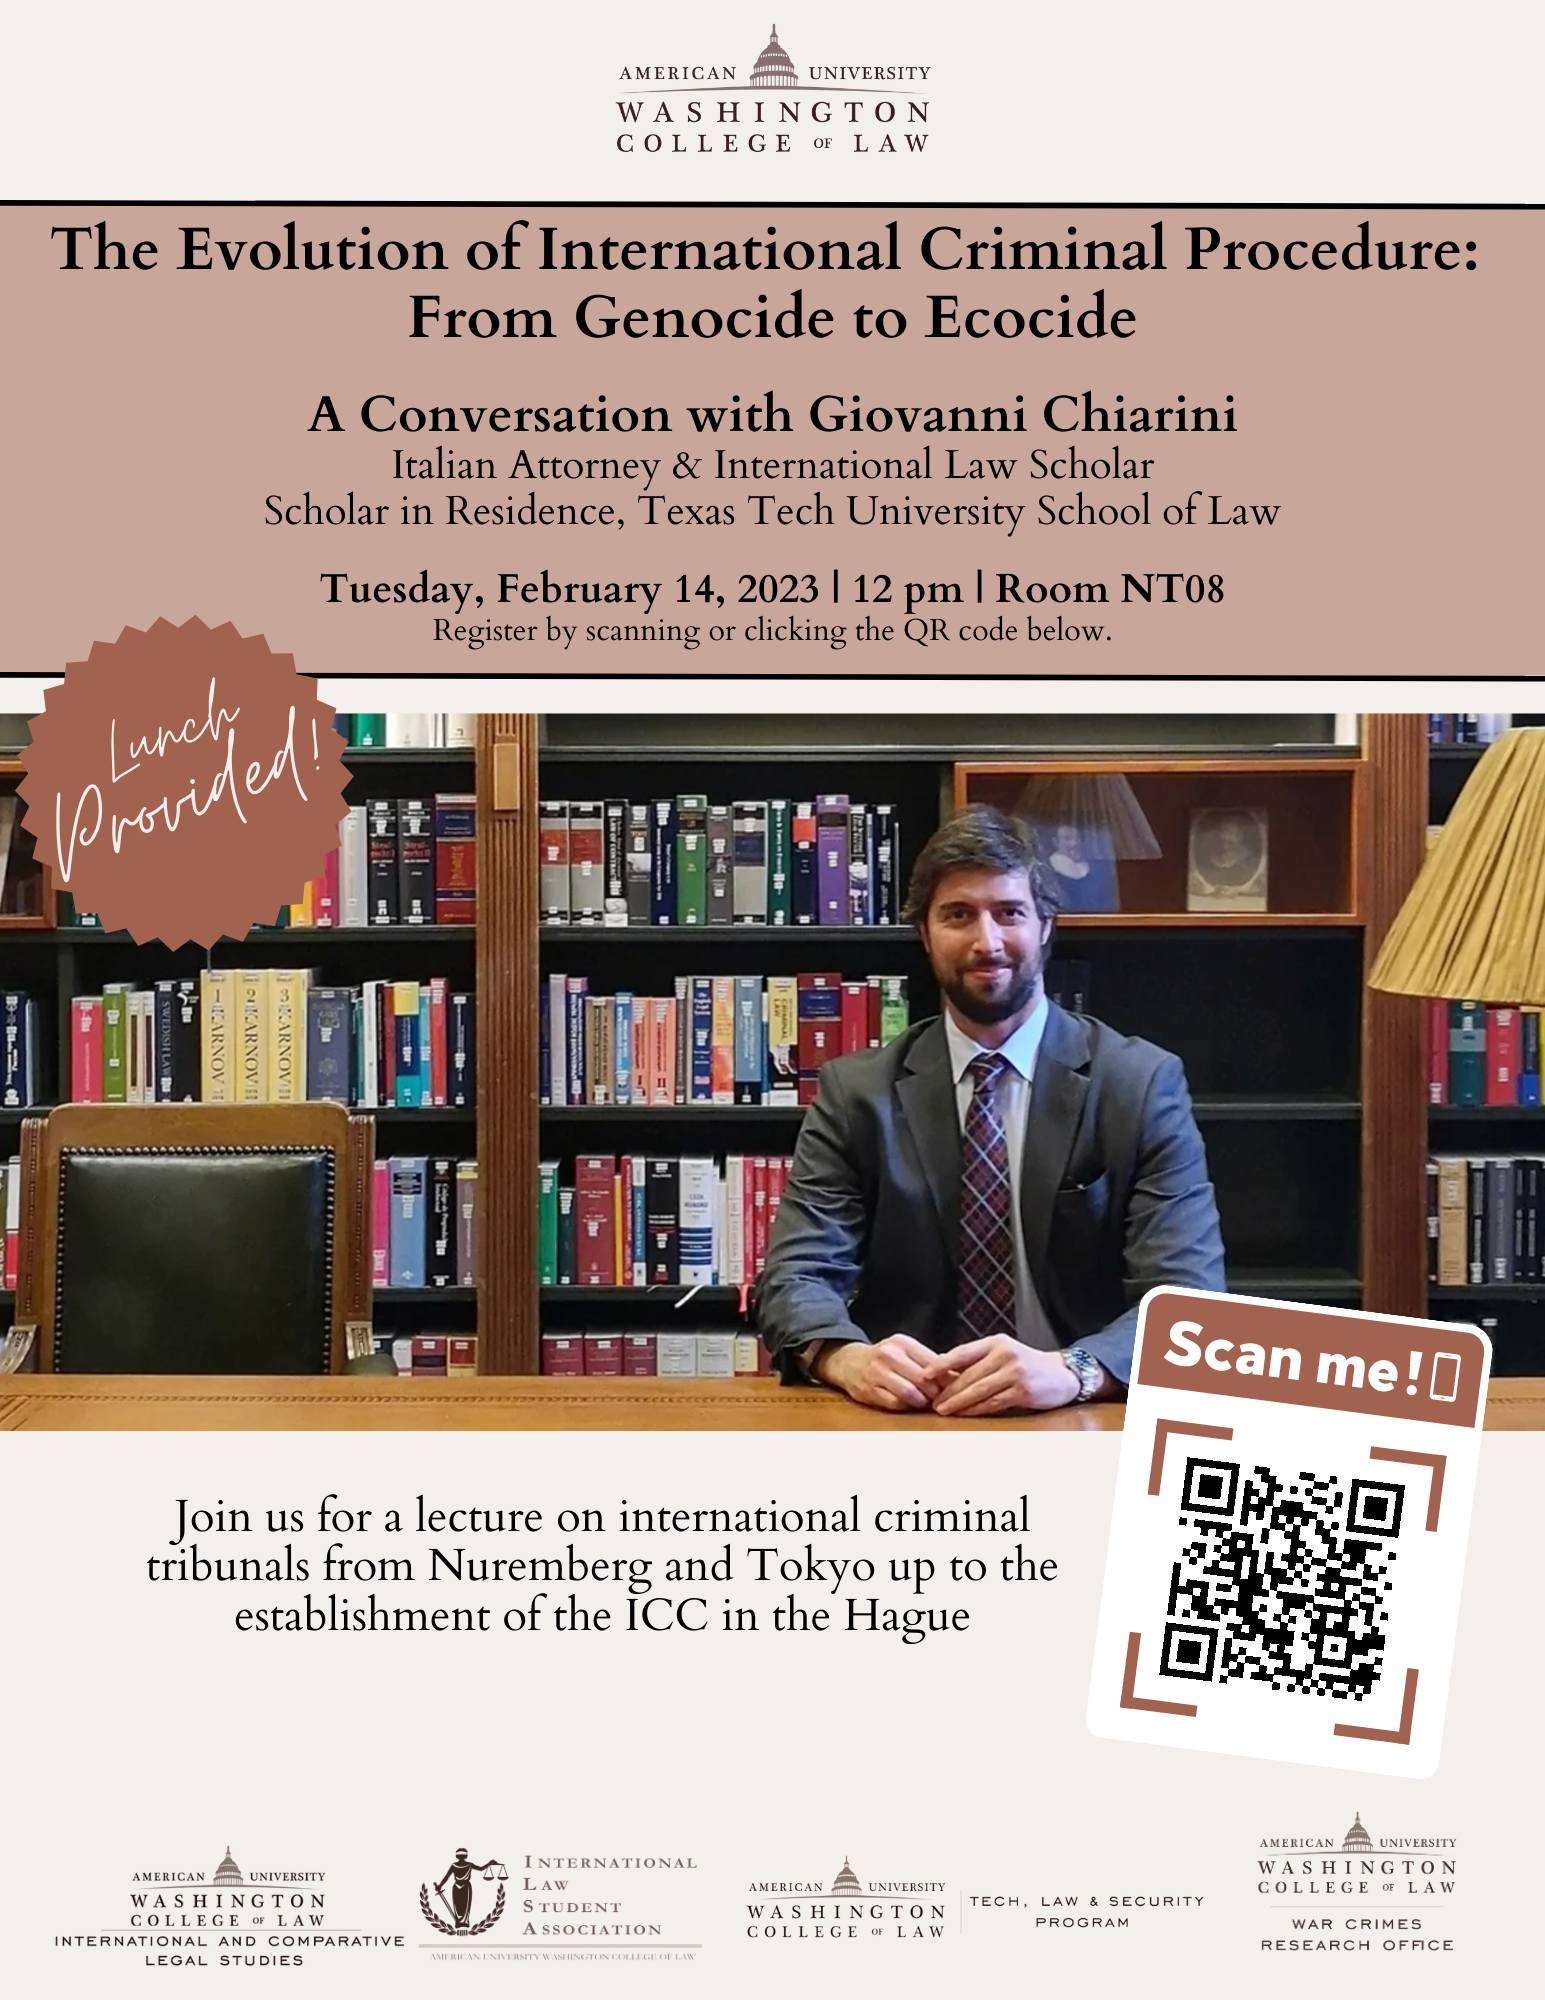 WCRO Co-Sponsors "The Evolution of International Criminal Procedure: From Genocide to Ecocide | A Conversation with Giovanni Chiarini"